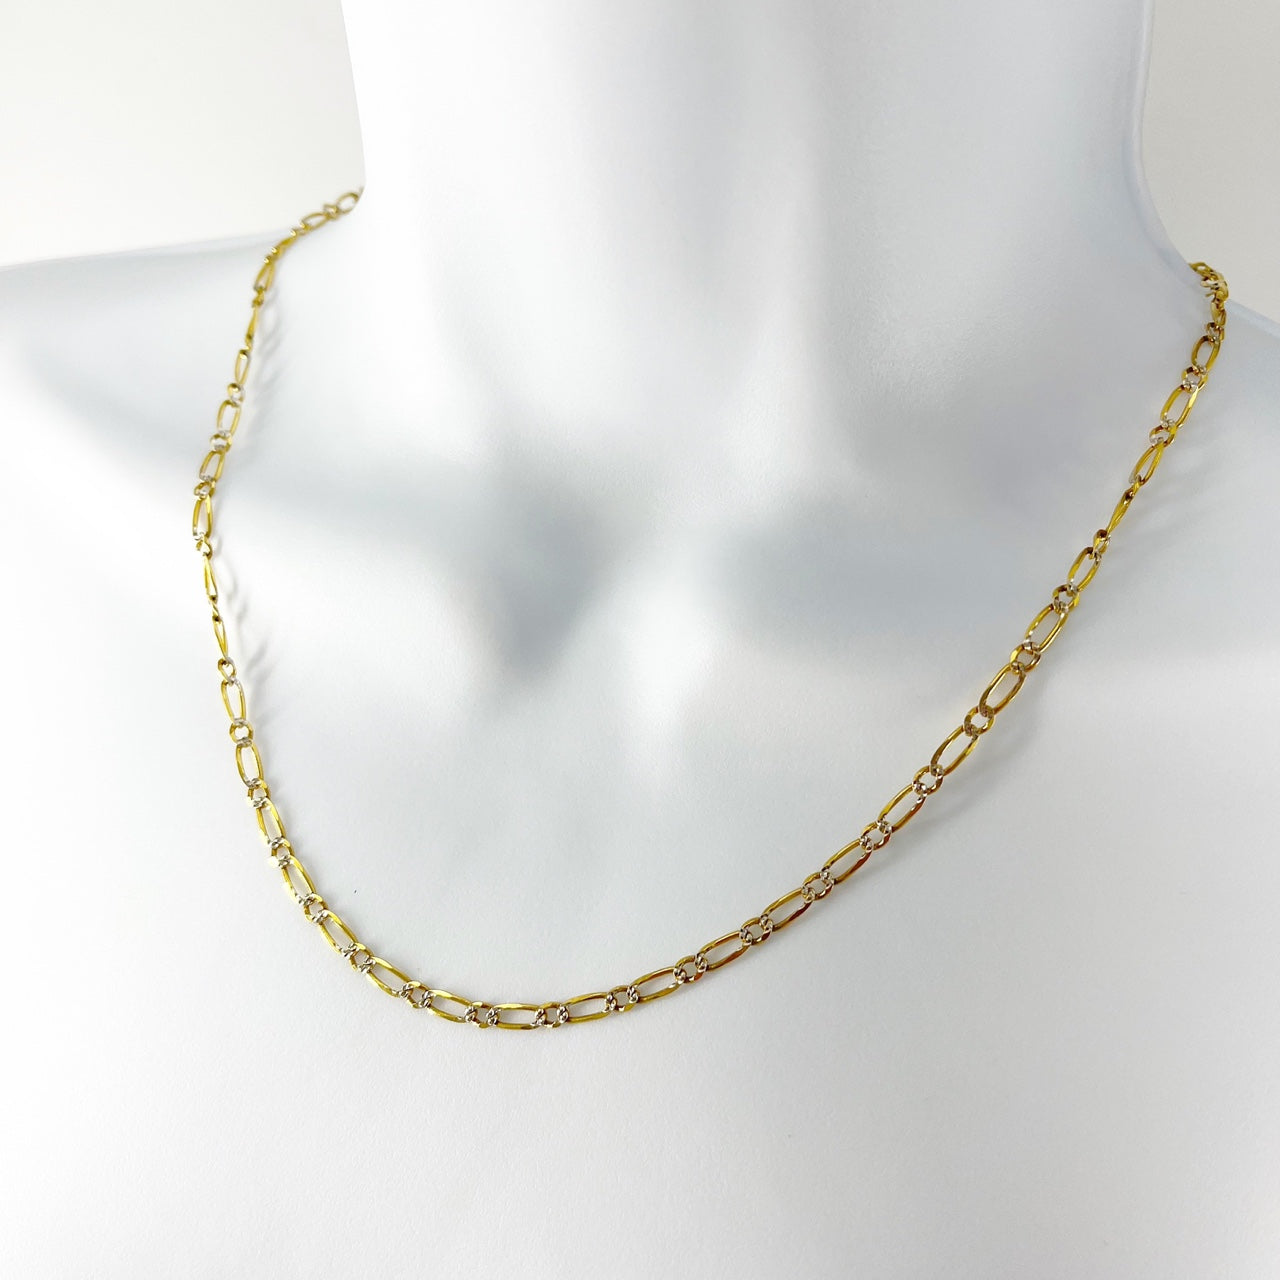 14k Solid yellow Gold/White Gold Paperclip Chain Necklace 20